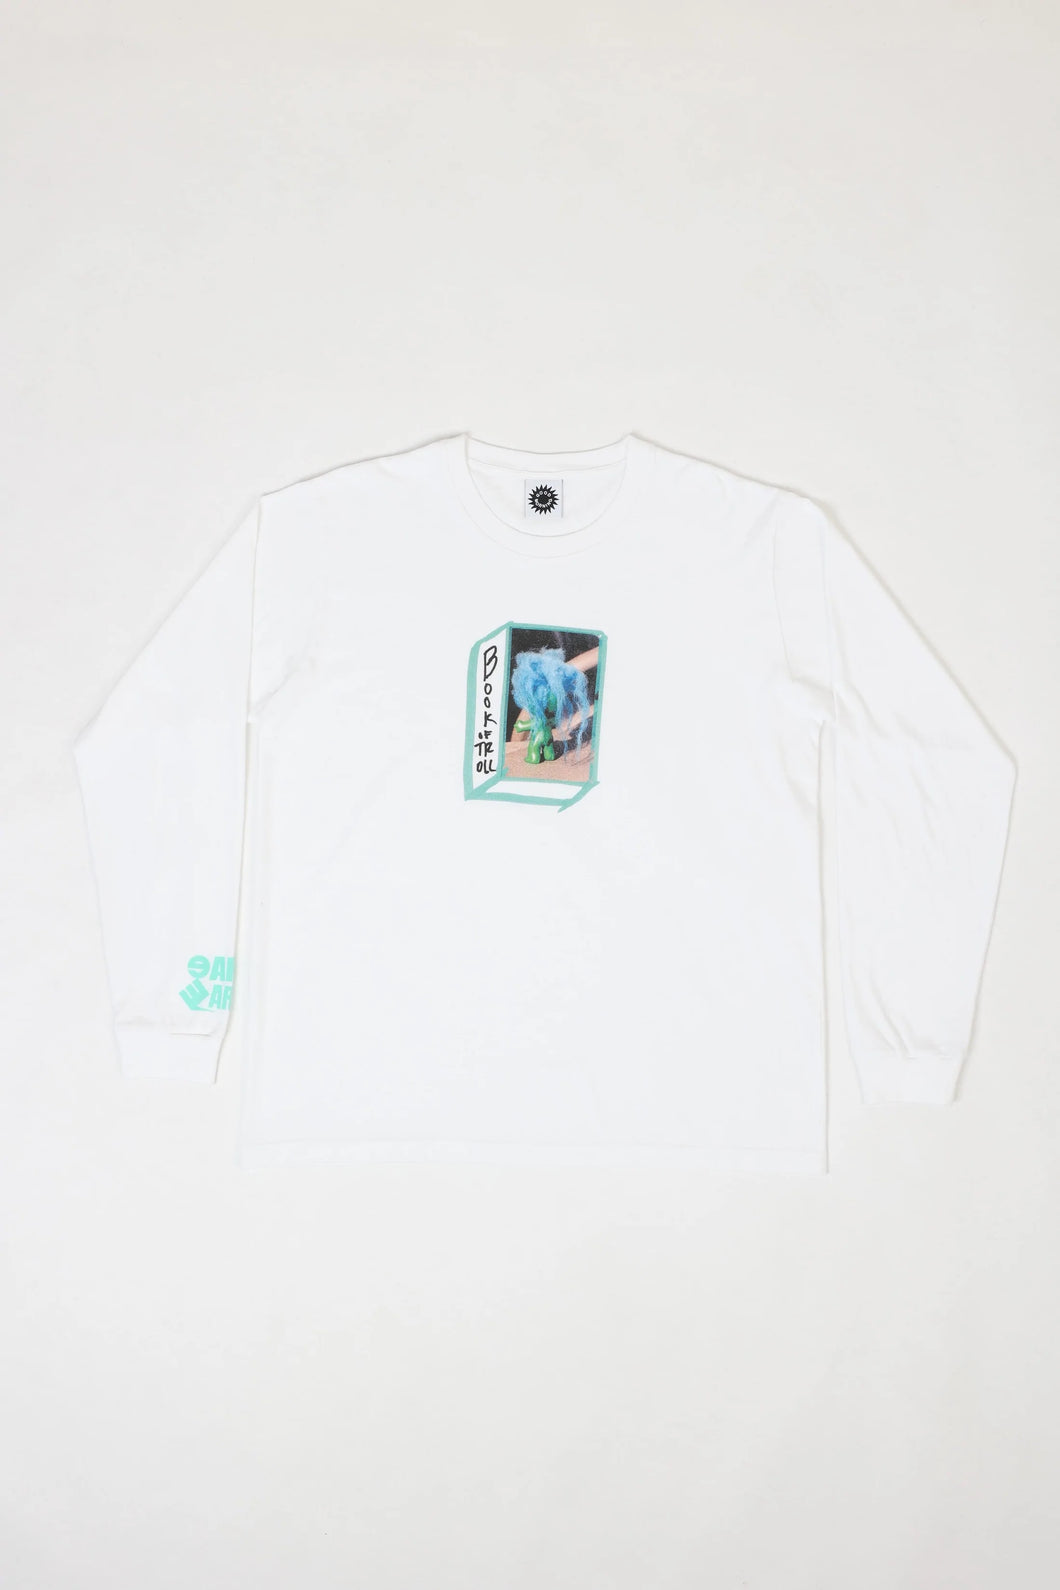 GMT Book Of Troll LS Tee White